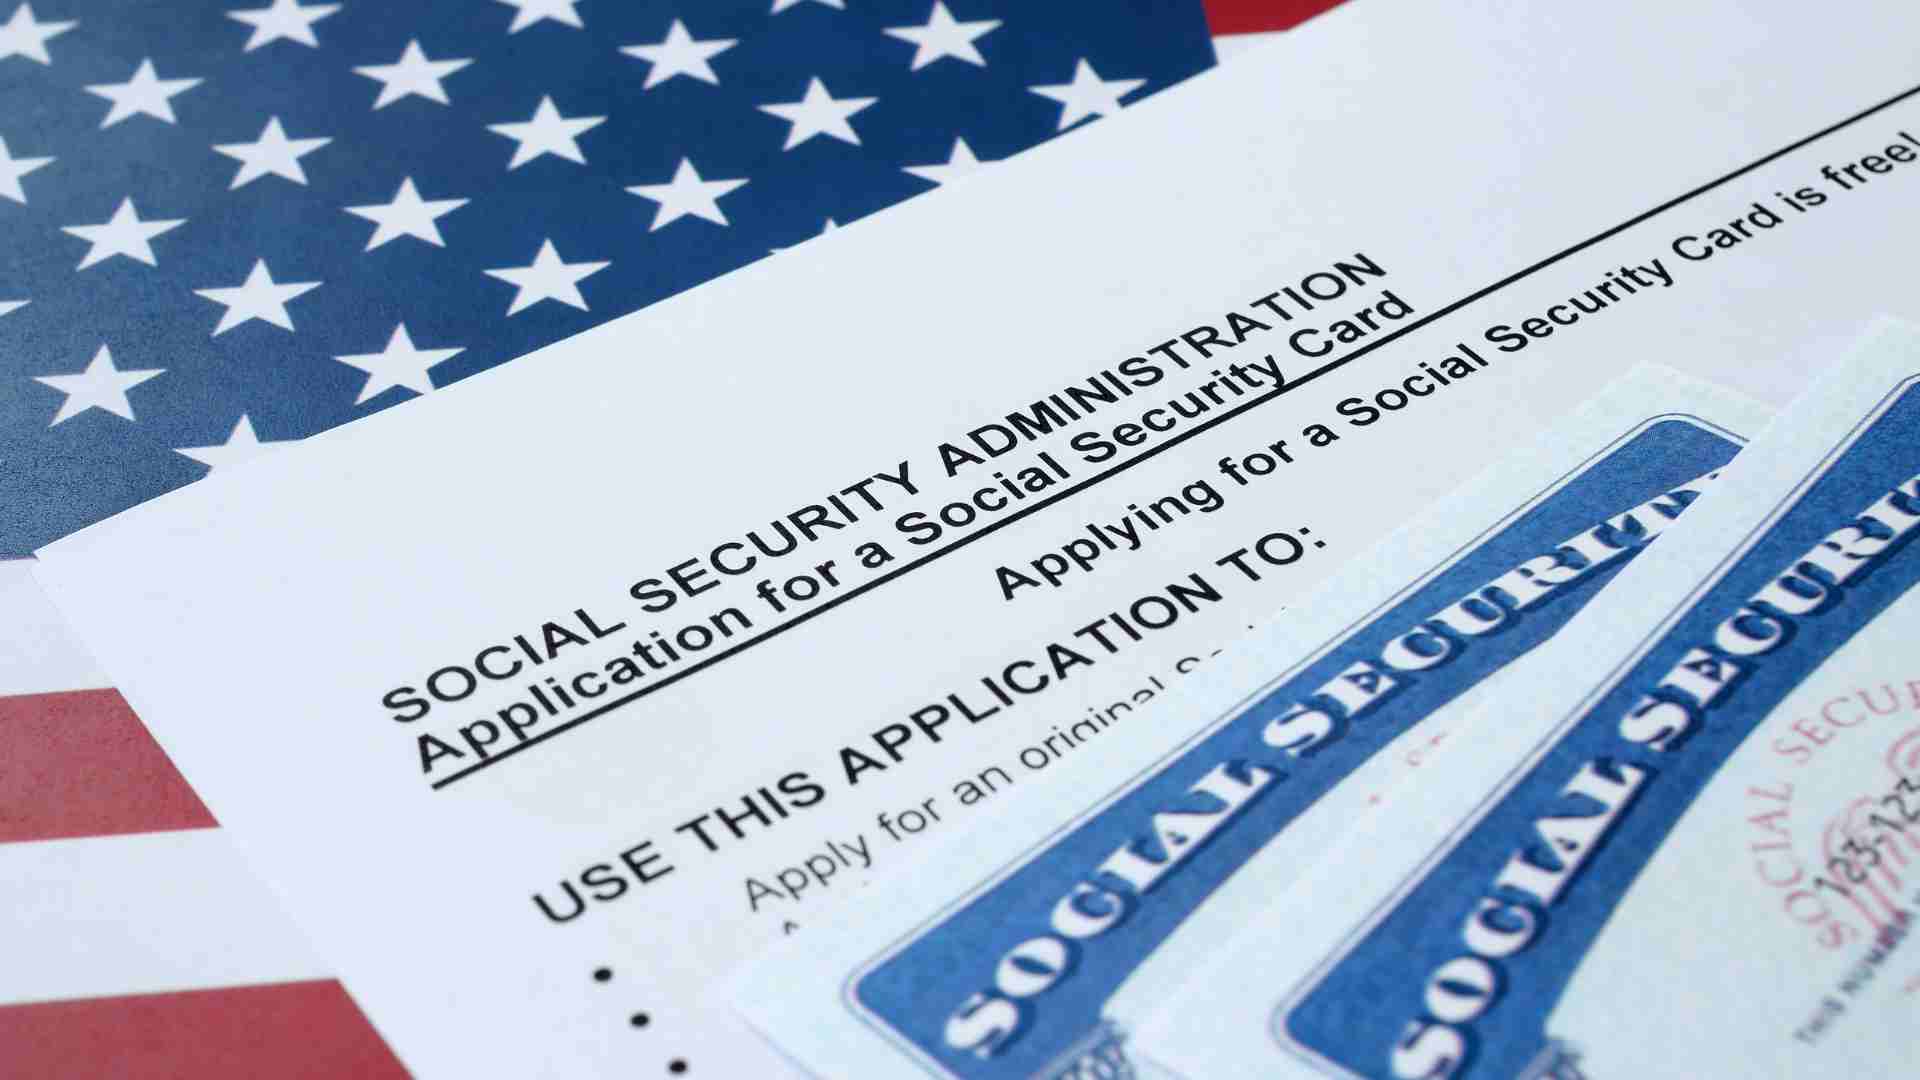 Millions of Americans rely on Social Security to make ends meet, check amounts and eligibility now